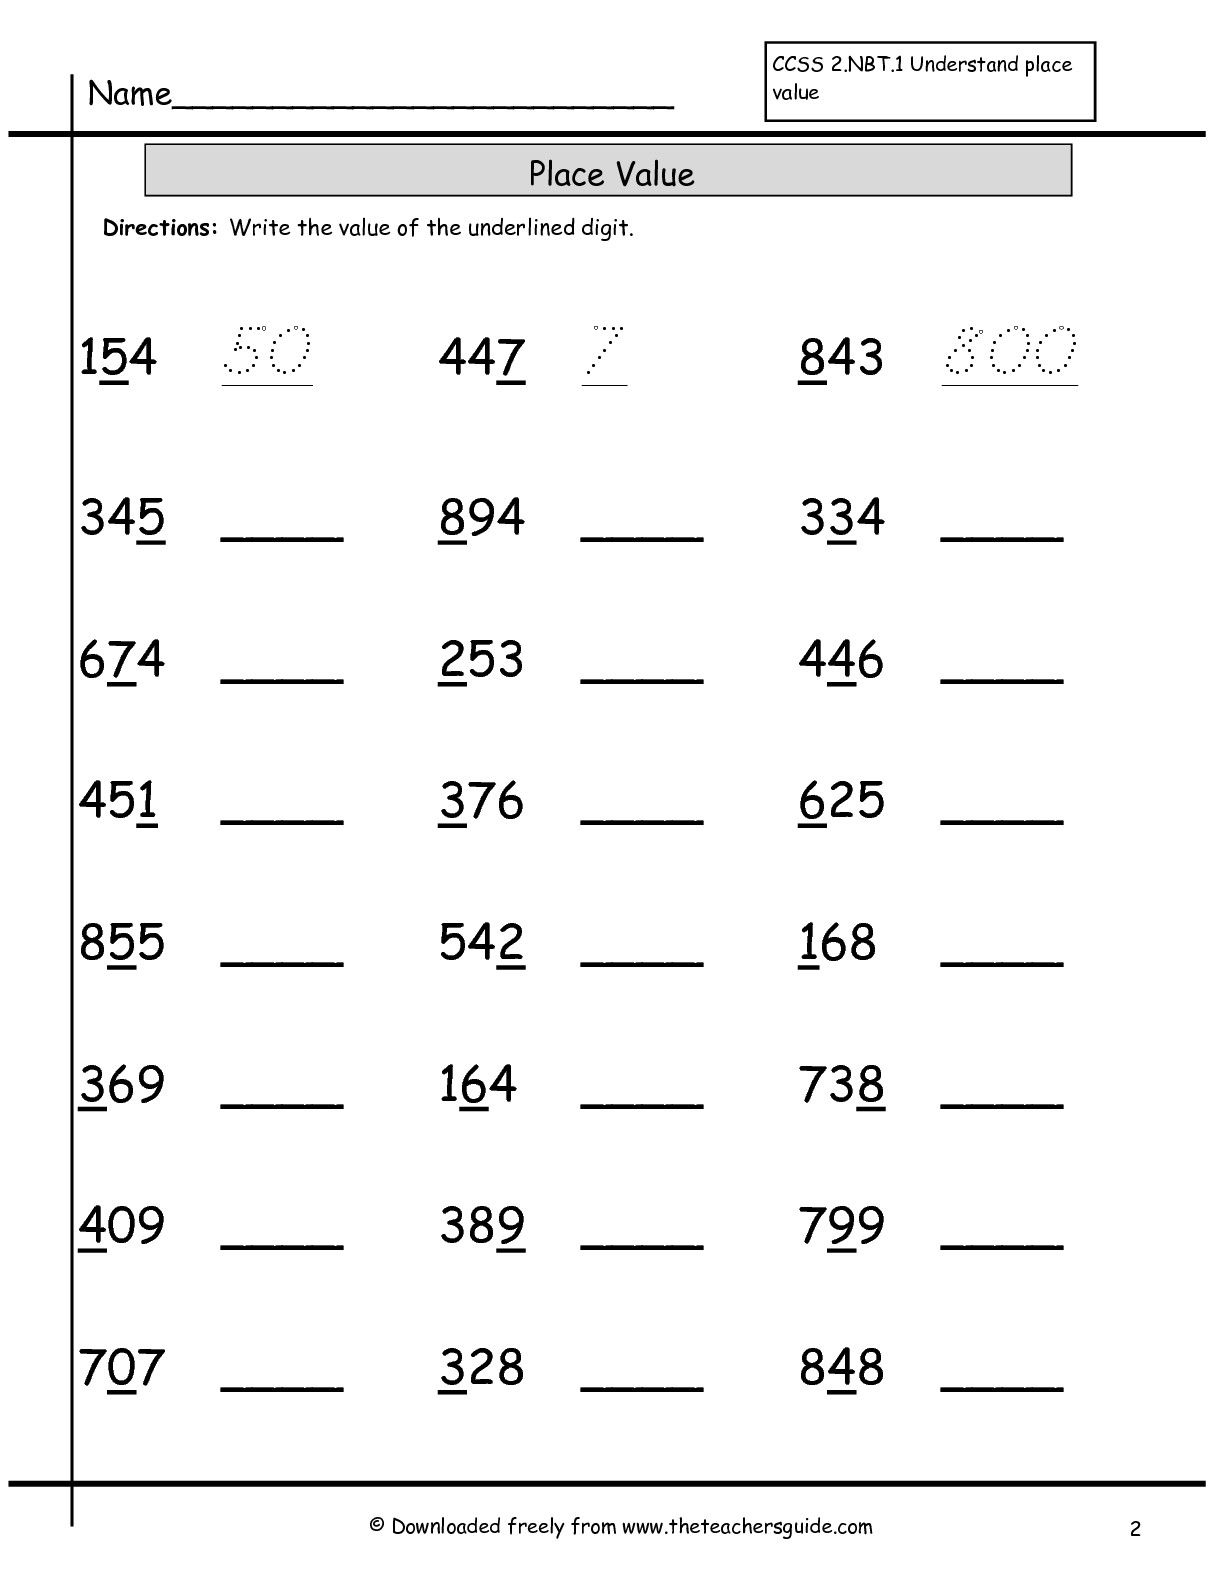 Place Value Worksheets 2Nd Grade To Free Download - Math Worksheet - Free Printable Place Value Worksheets